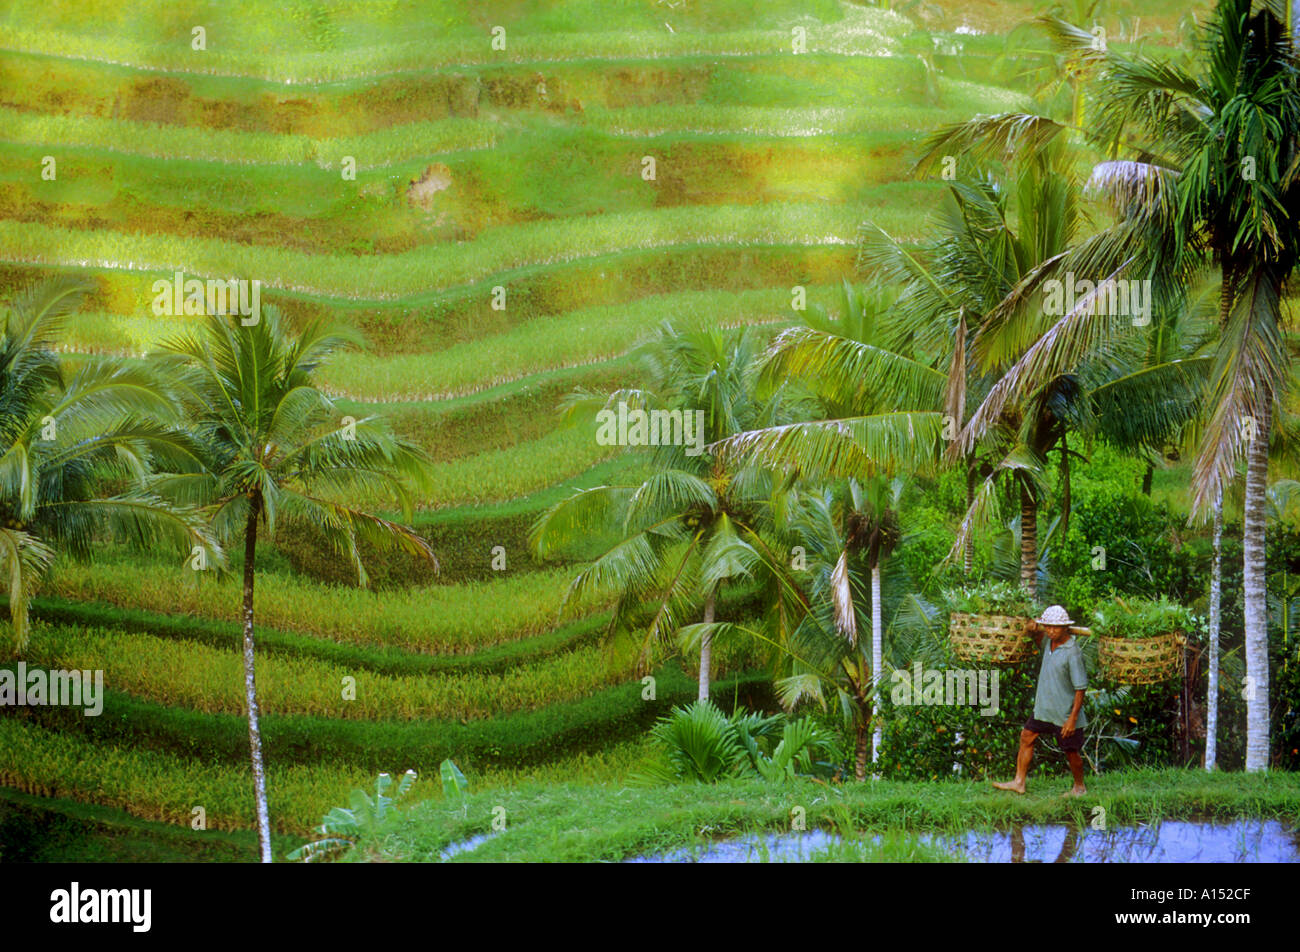 Terraced Rice Fields in Tegallalang, Central Bali (Indonesia) Stock Photo